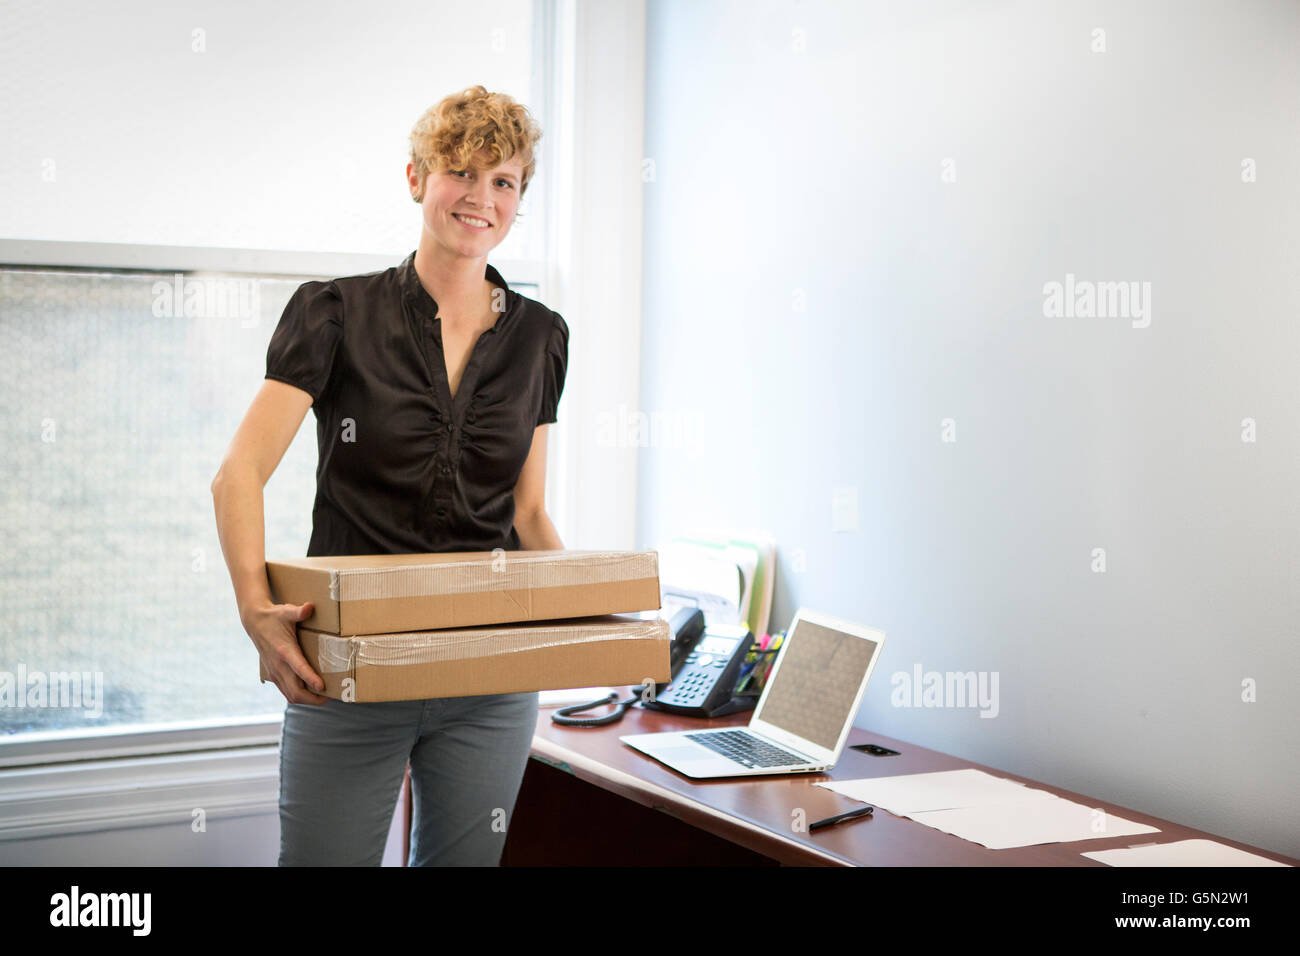 Caucasian businesswoman holding package in office Stock Photo